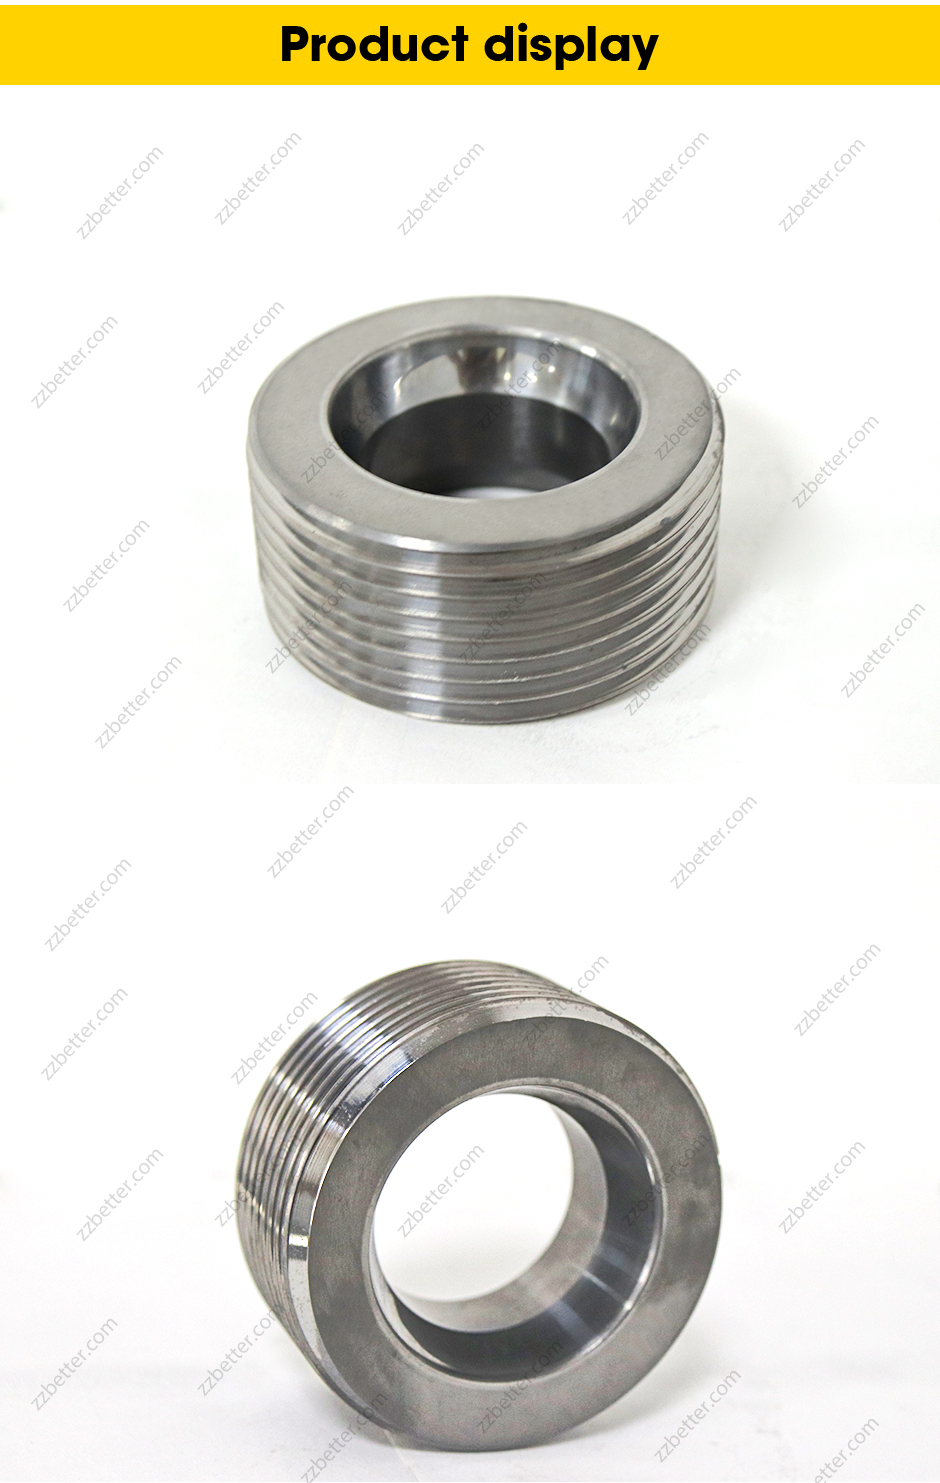 Carbide Bush with Thread for Oil filed